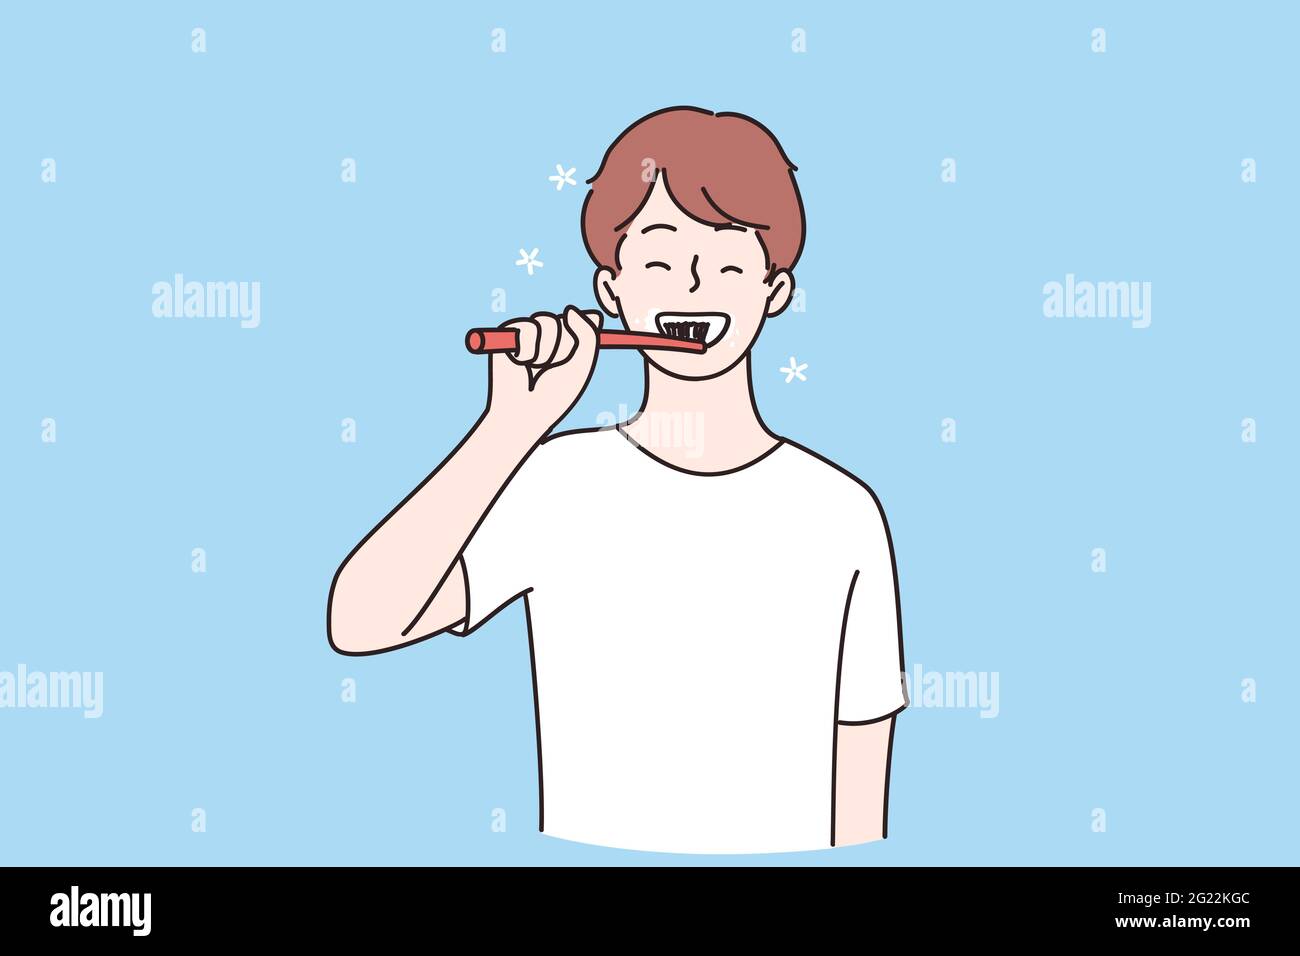 Dental health and hygiene concept. Young smiling child boy cartoon ...